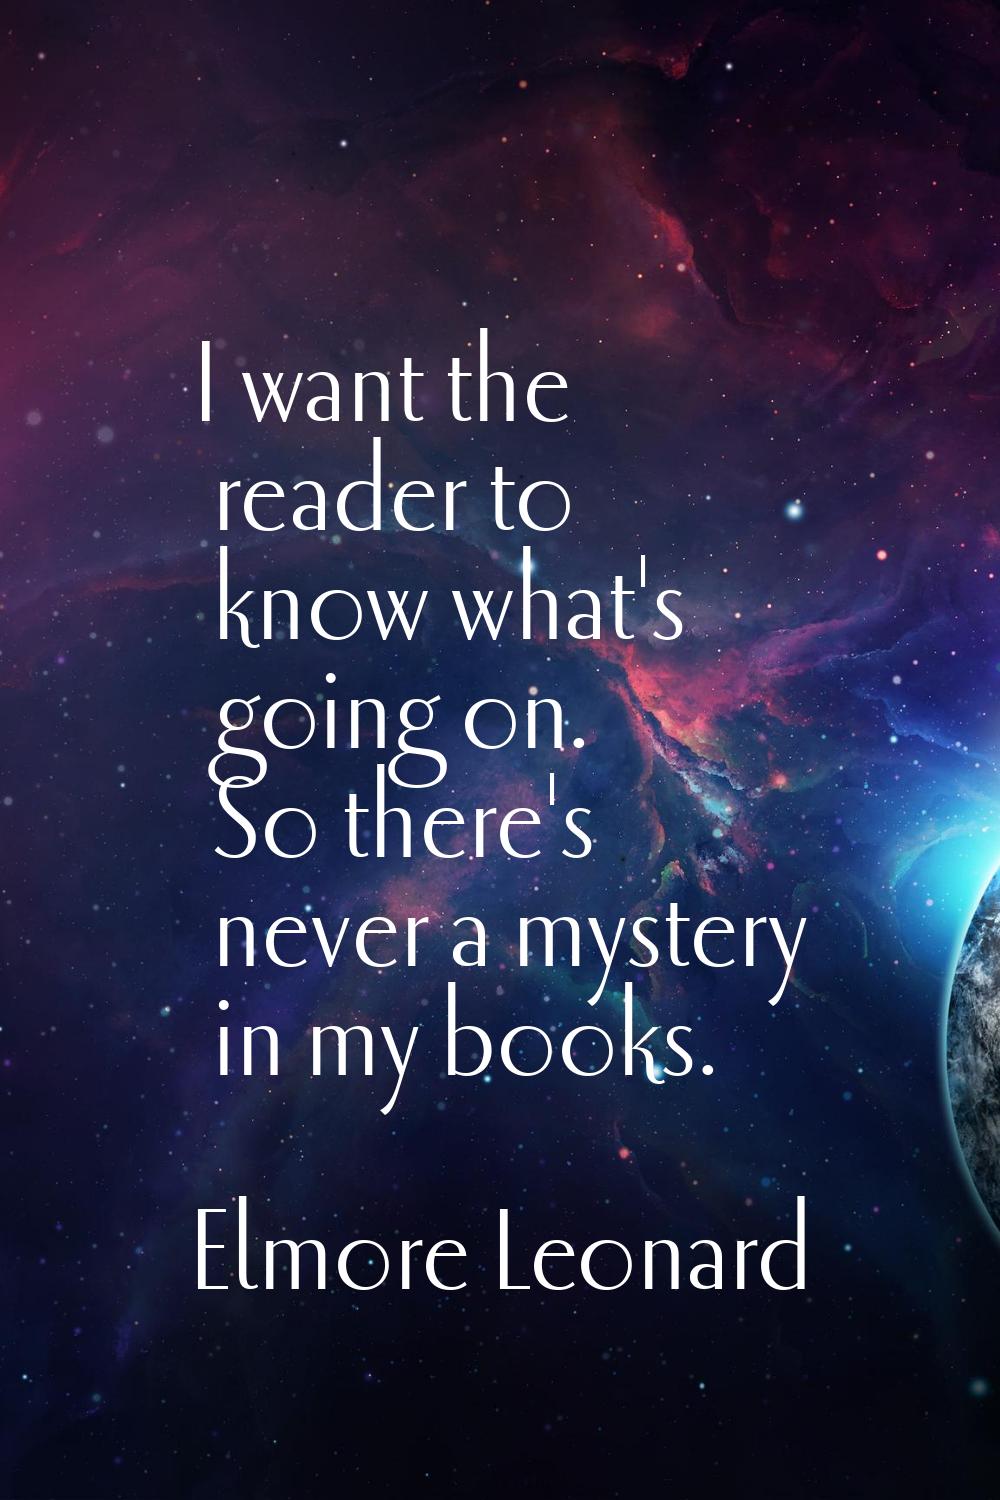 I want the reader to know what's going on. So there's never a mystery in my books.